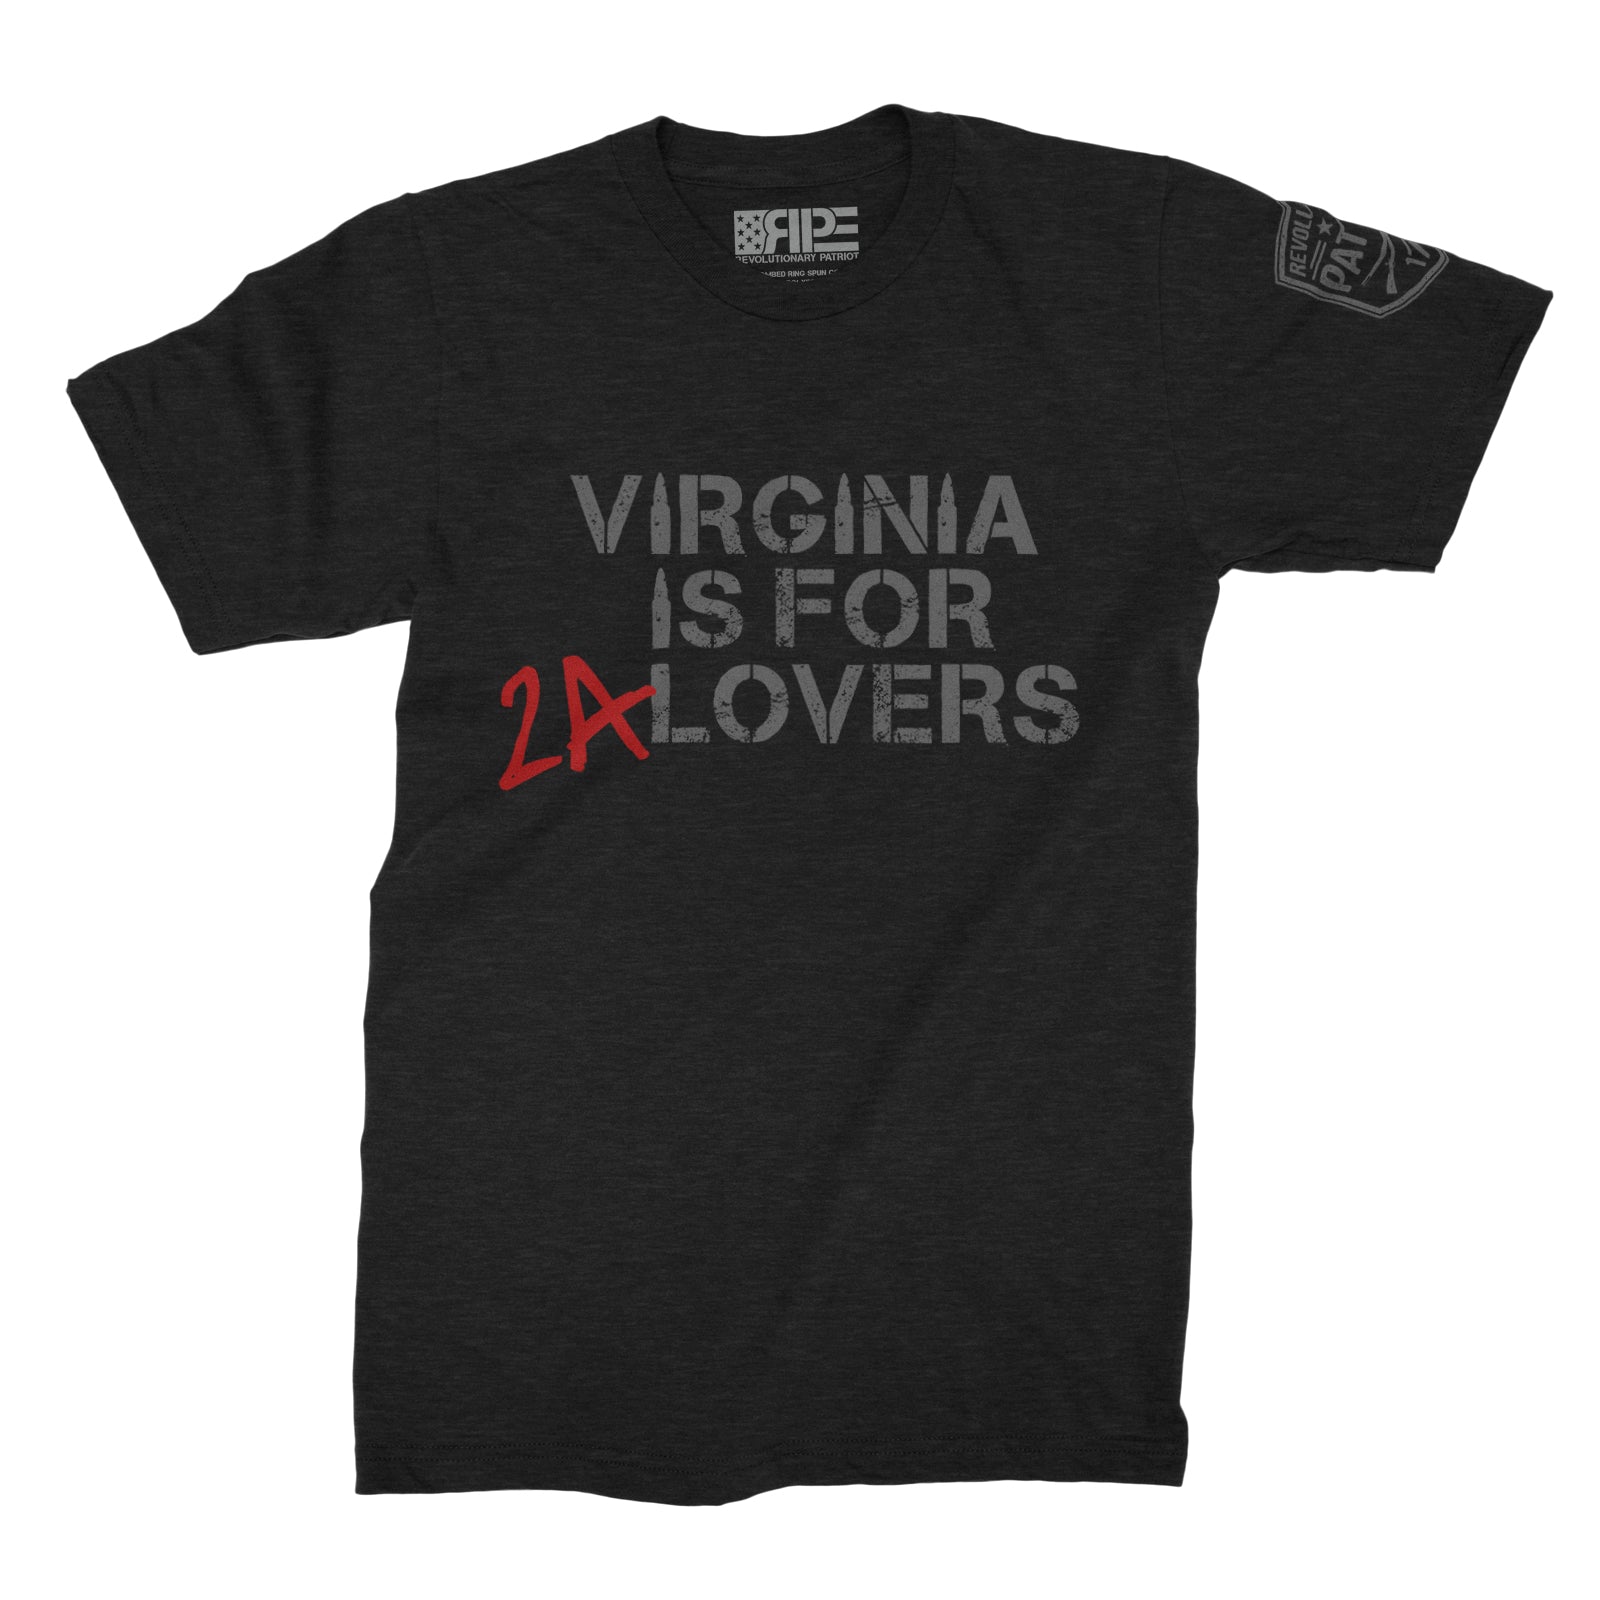 Virginia is for 2A Lovers (Black Heather) - Revolutionary Patriot